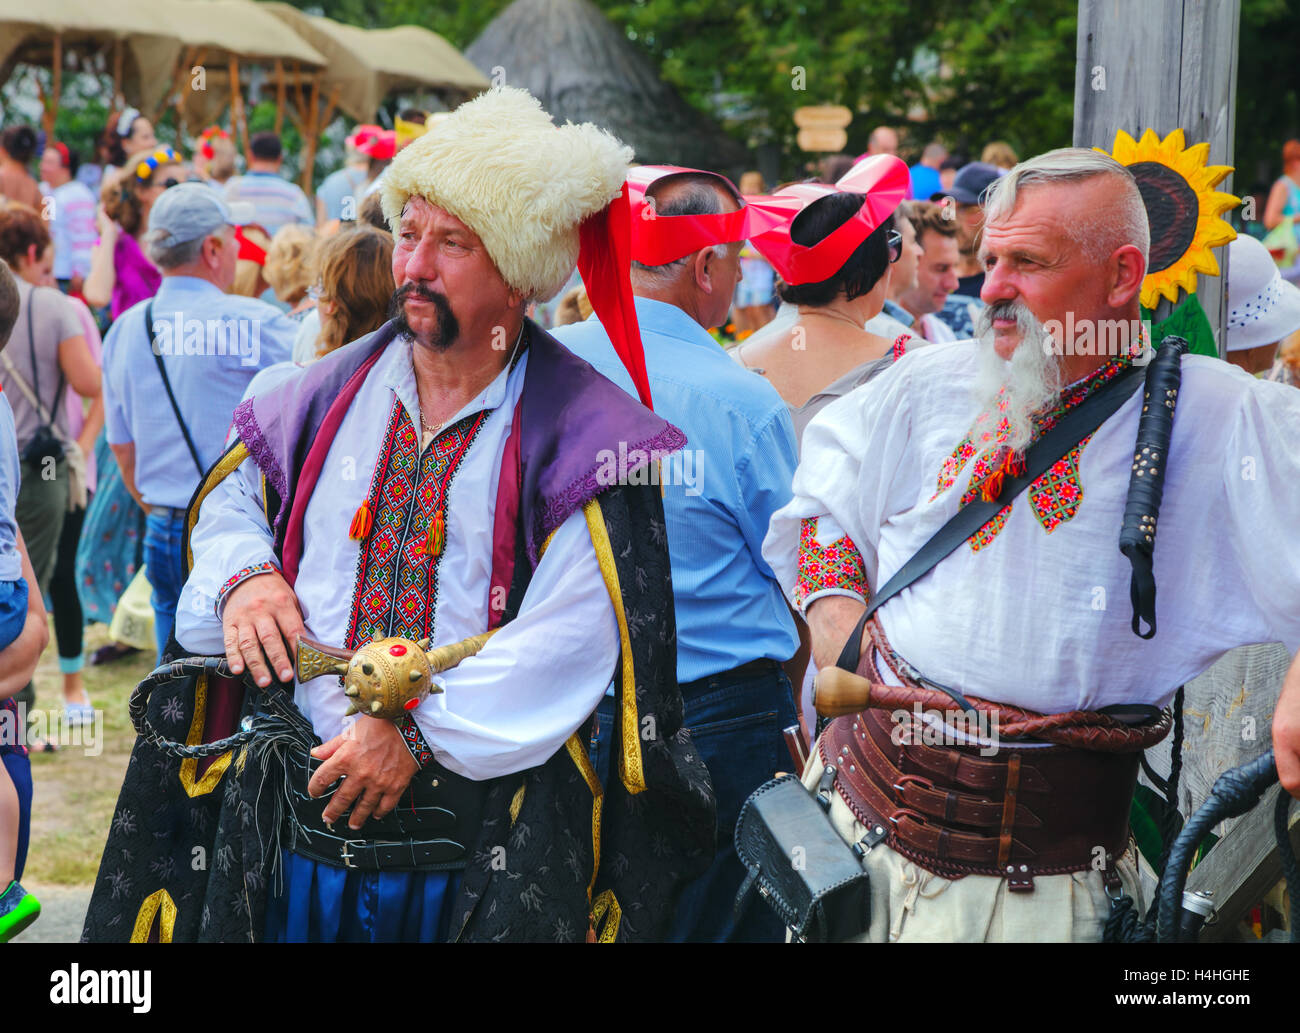 VELYKI SOROCHYNTSI, UKRAINE - AUGUST 20: Two cossacks at the All-Ukrainian fair crowded with people on August 20, 2016 Stock Photo